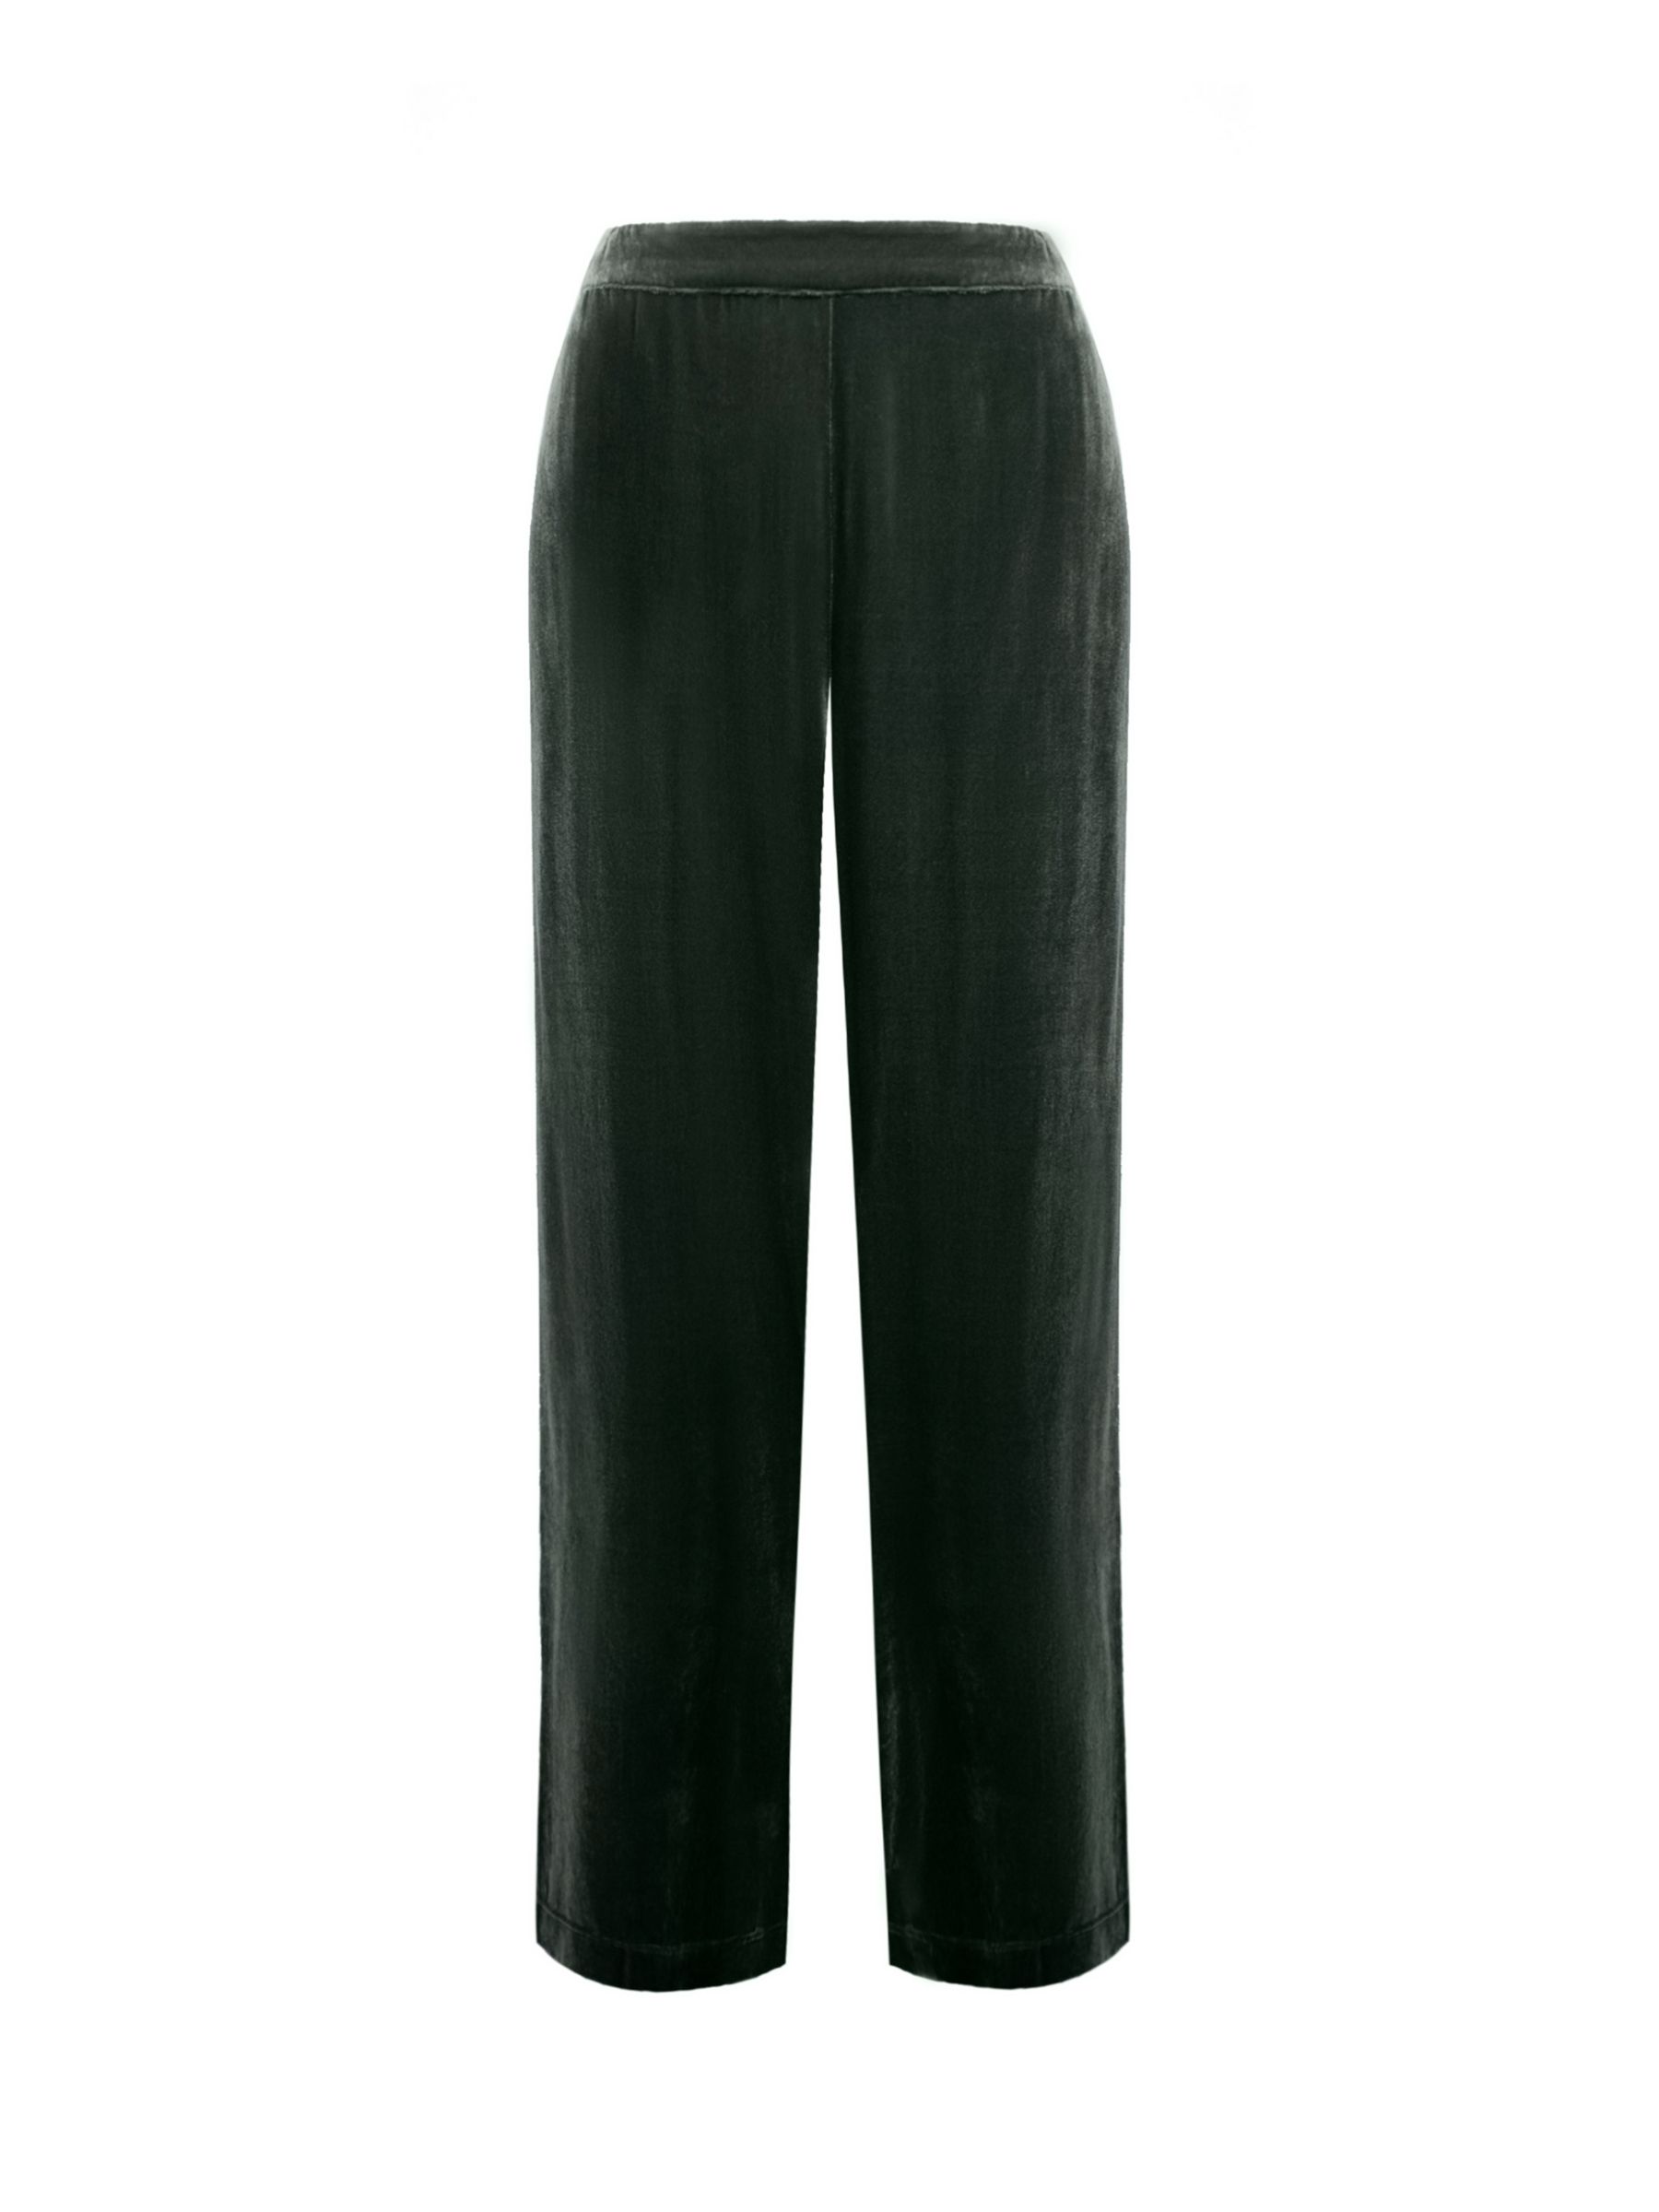 NRBY Thea Silk Blend Velvet Trousers, Peacock Blue, Midnight at